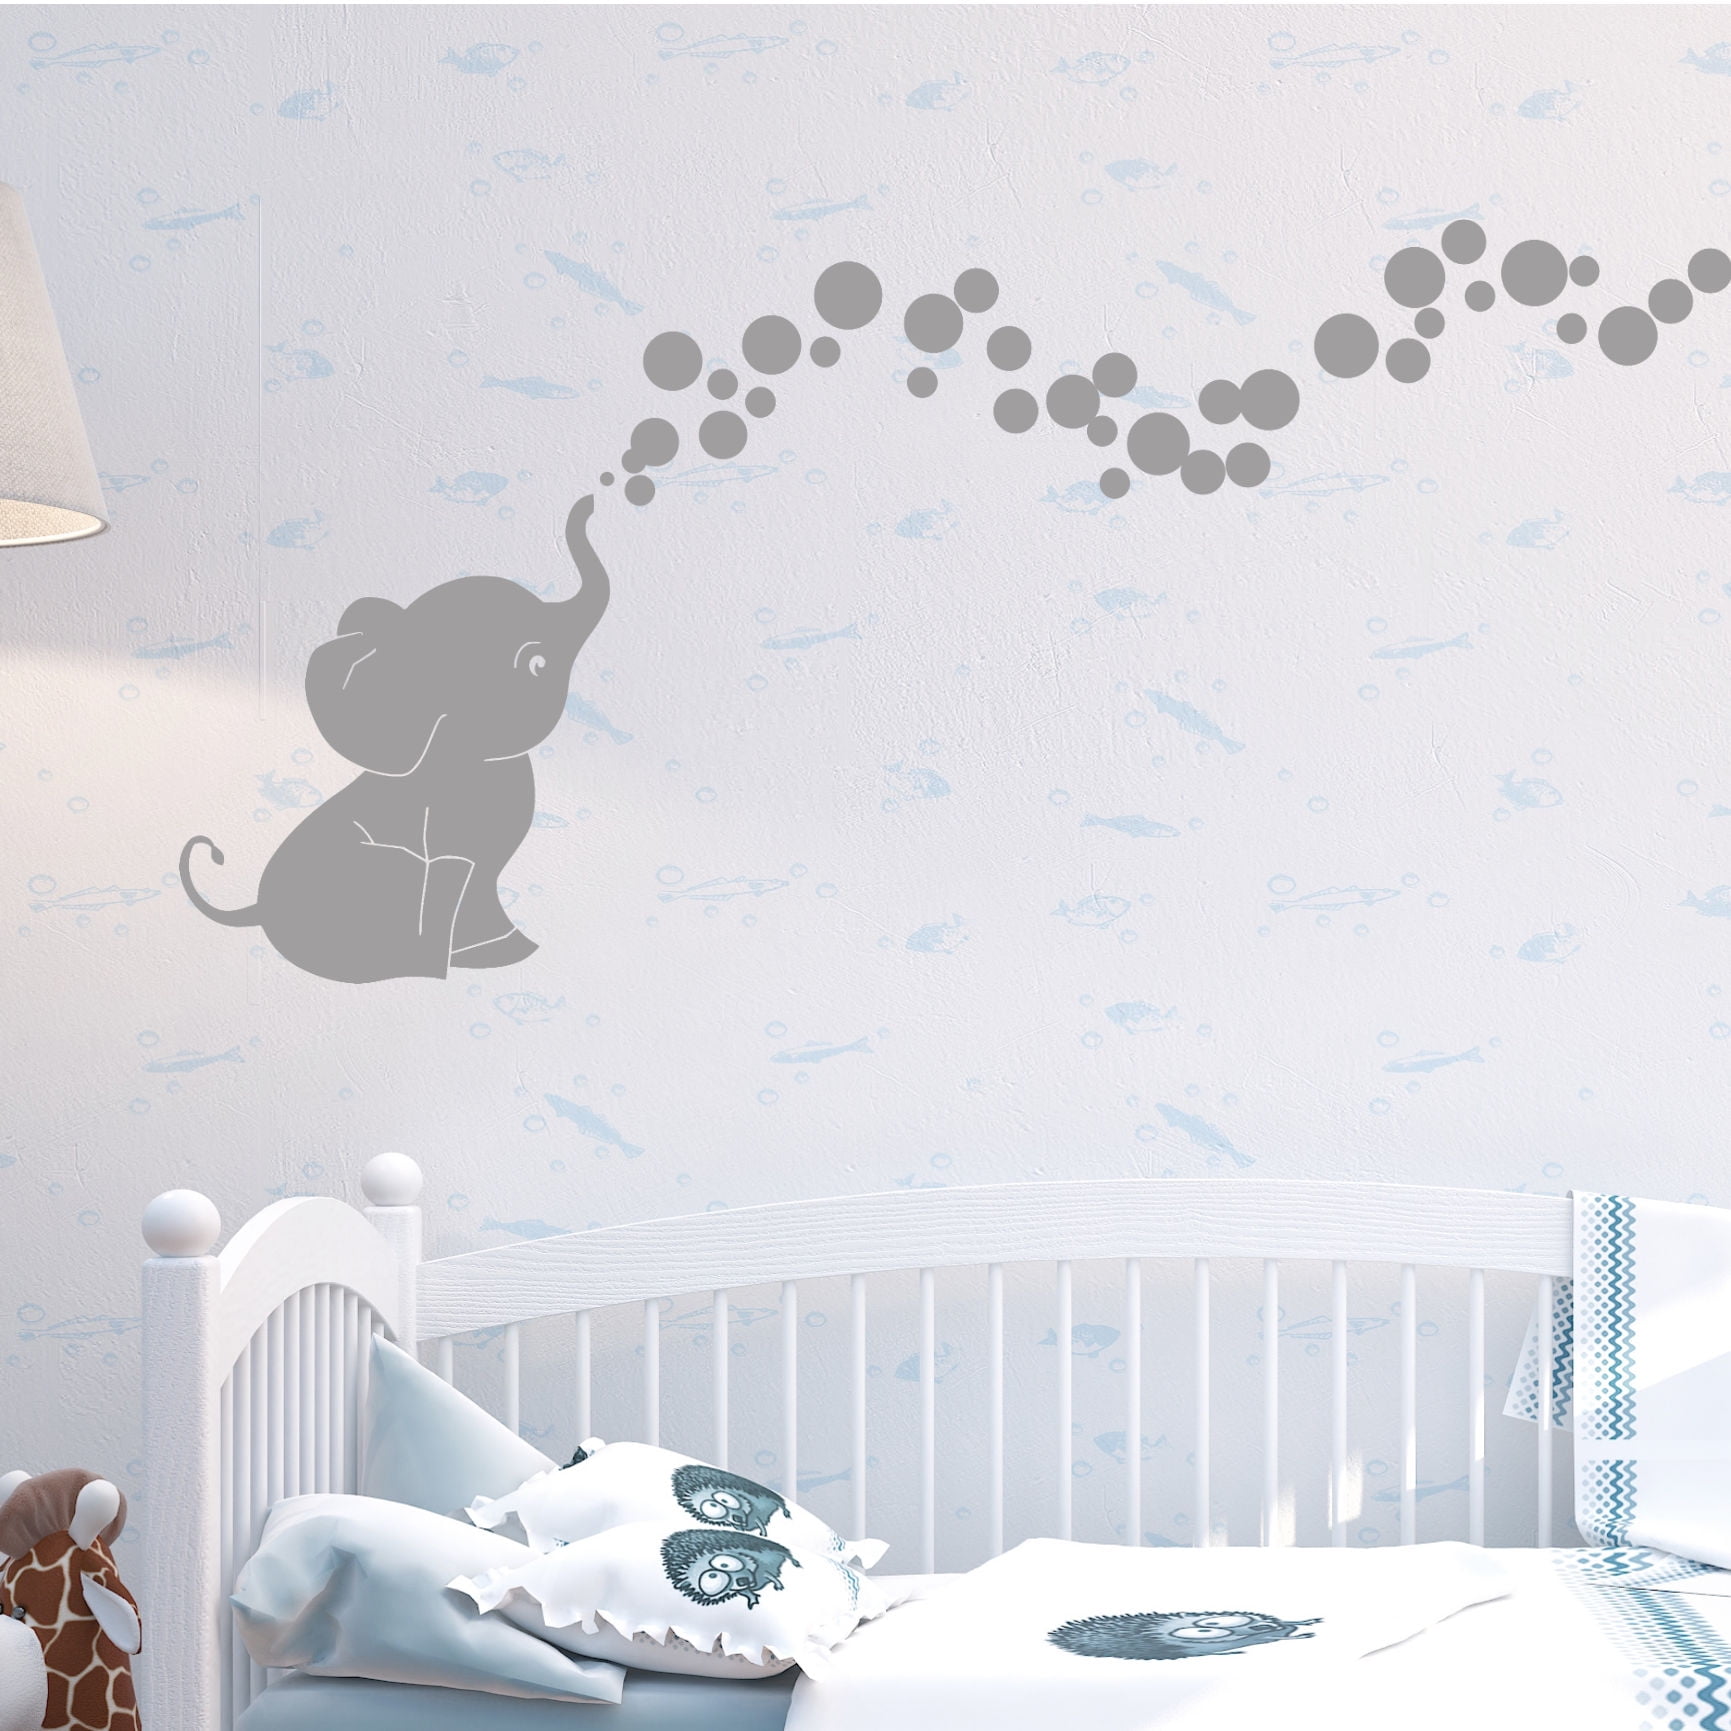 nursery room decor Choose Elephant and Bubble Color Makes a great baby shower gift Elephant Bubbles with Name Vinyl Wall Decal Custom gry turquoise 